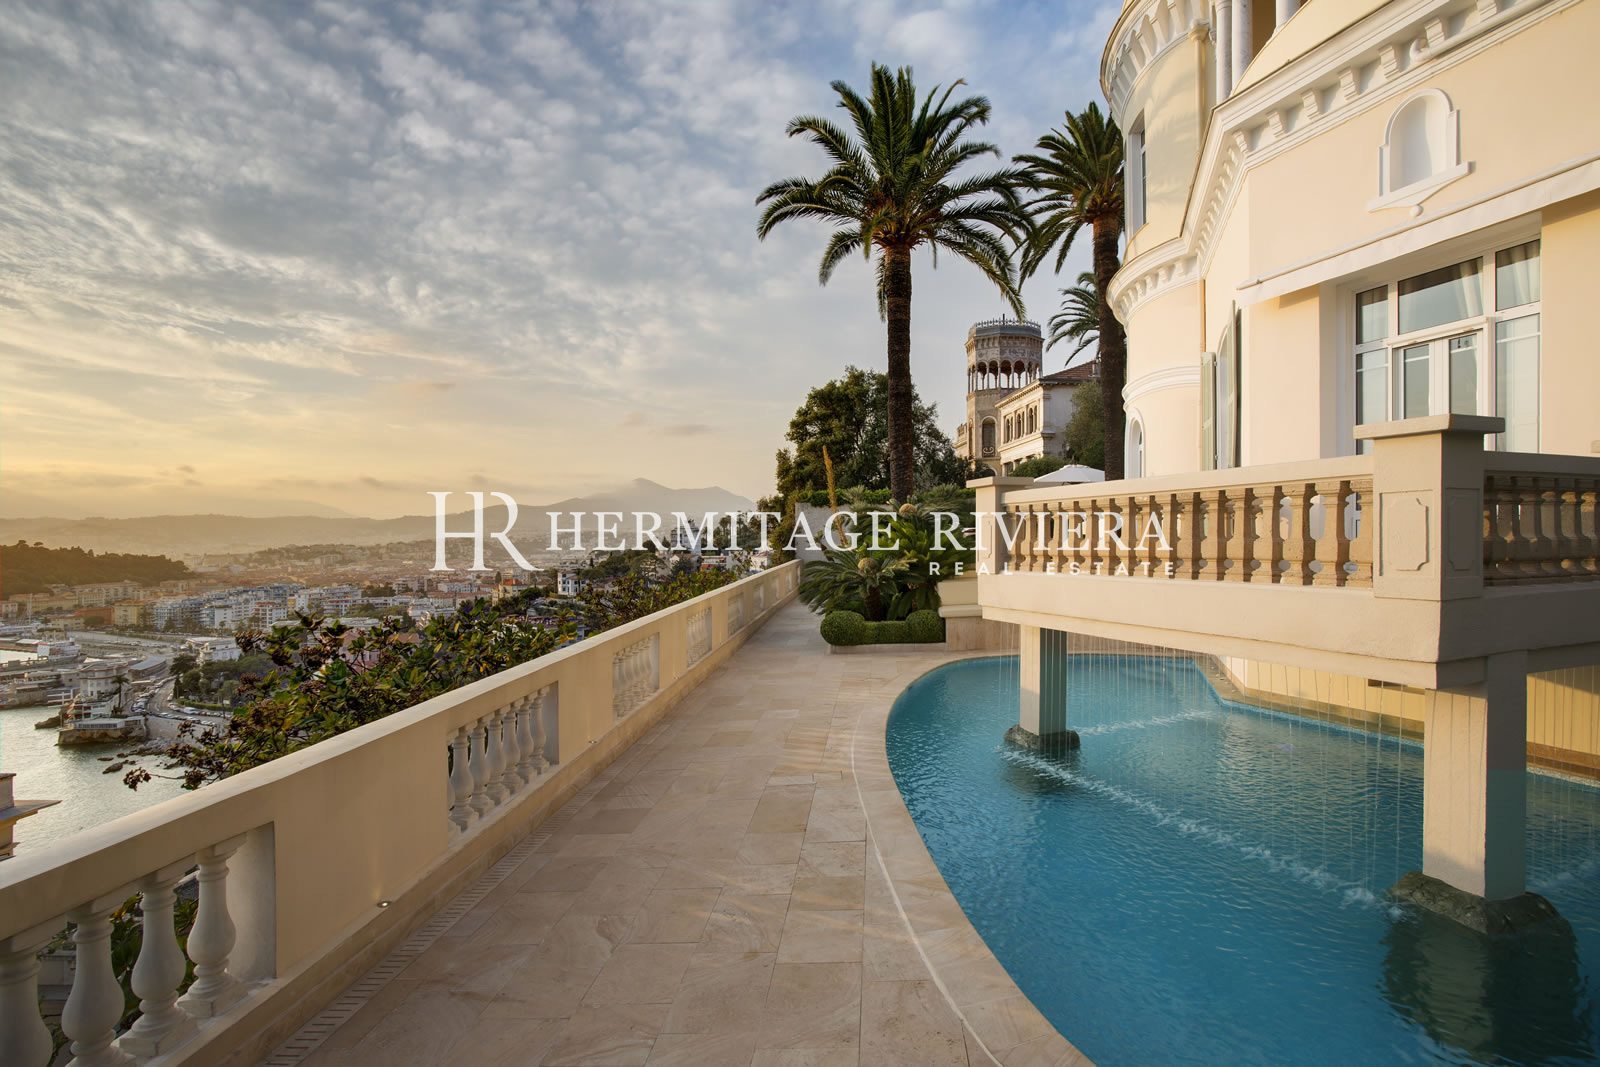 Luxurious chateau with breathtaking views (image 2)